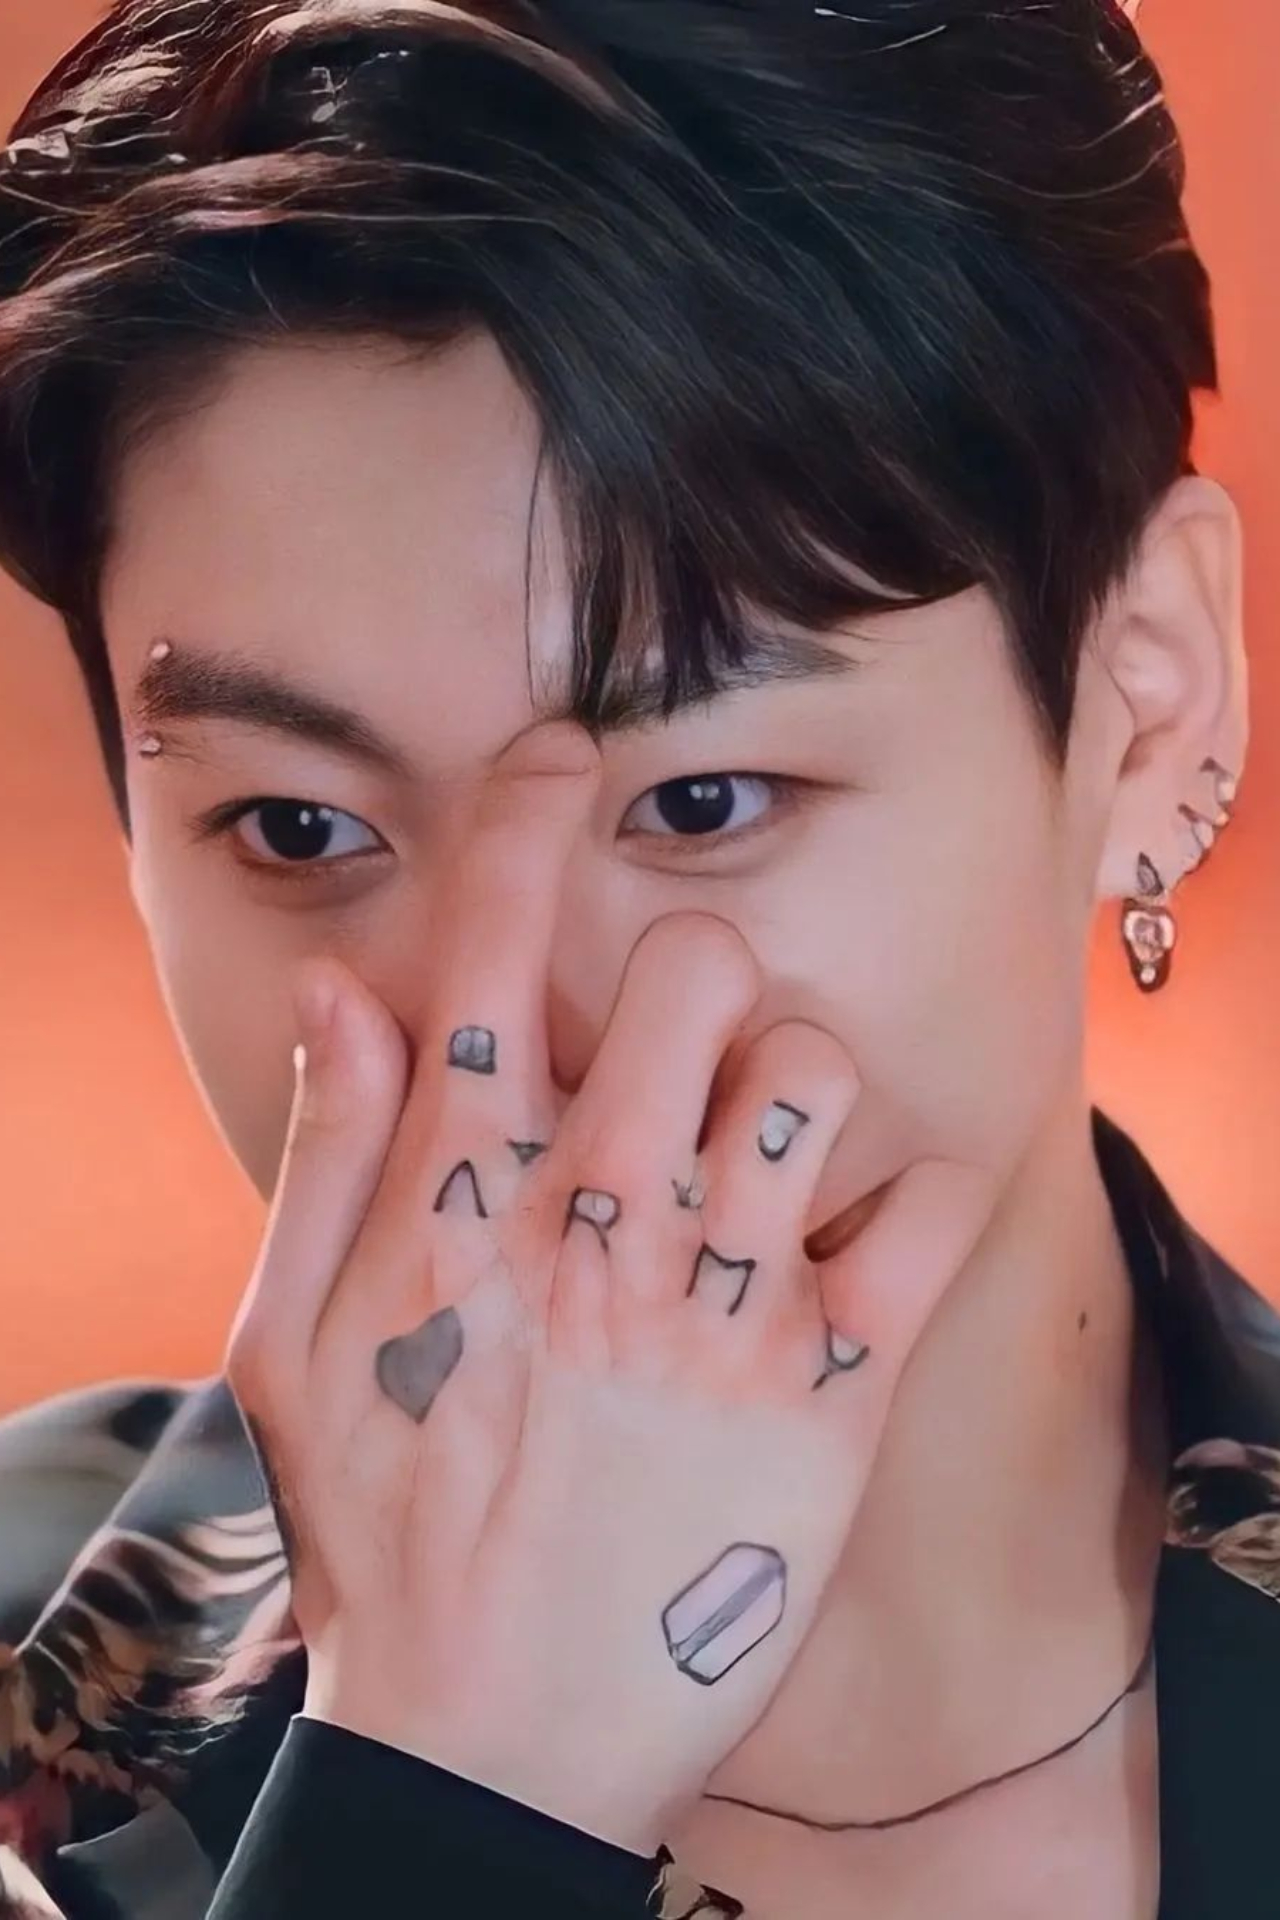 This is the meaning of Jungkooks tattoos  YAAY KPOP